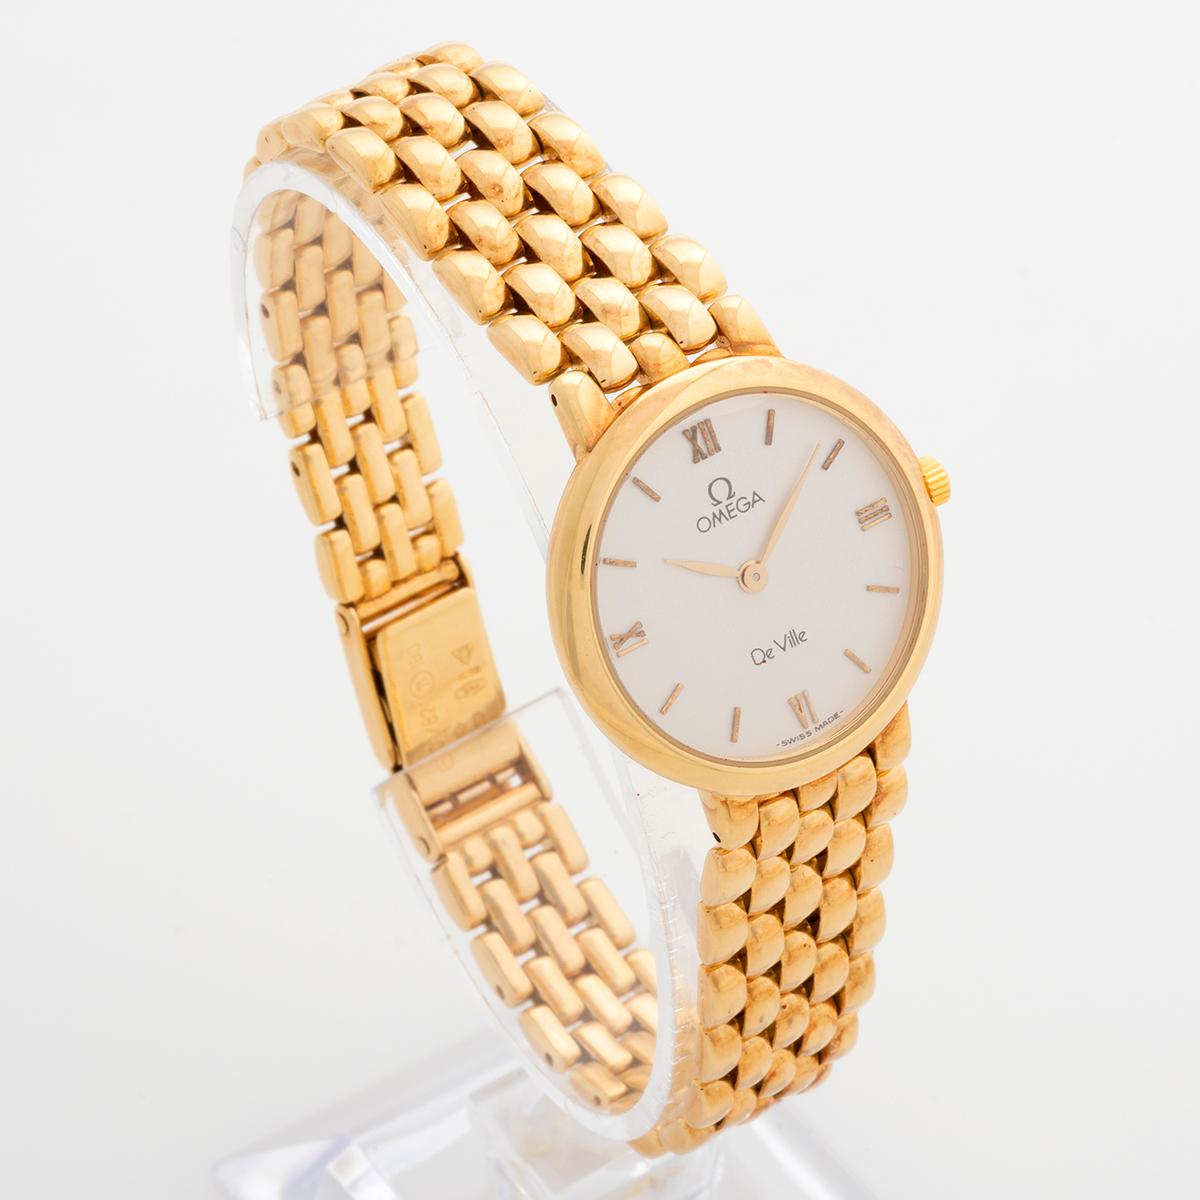 Our lovely neo-vintage quartz Omega ladies De Ville features an 18k yellow gold 25mm case and bracelet. Presented in excellent contain with light signs of use from new, this particular example comes complete with inner and outer box (the inner